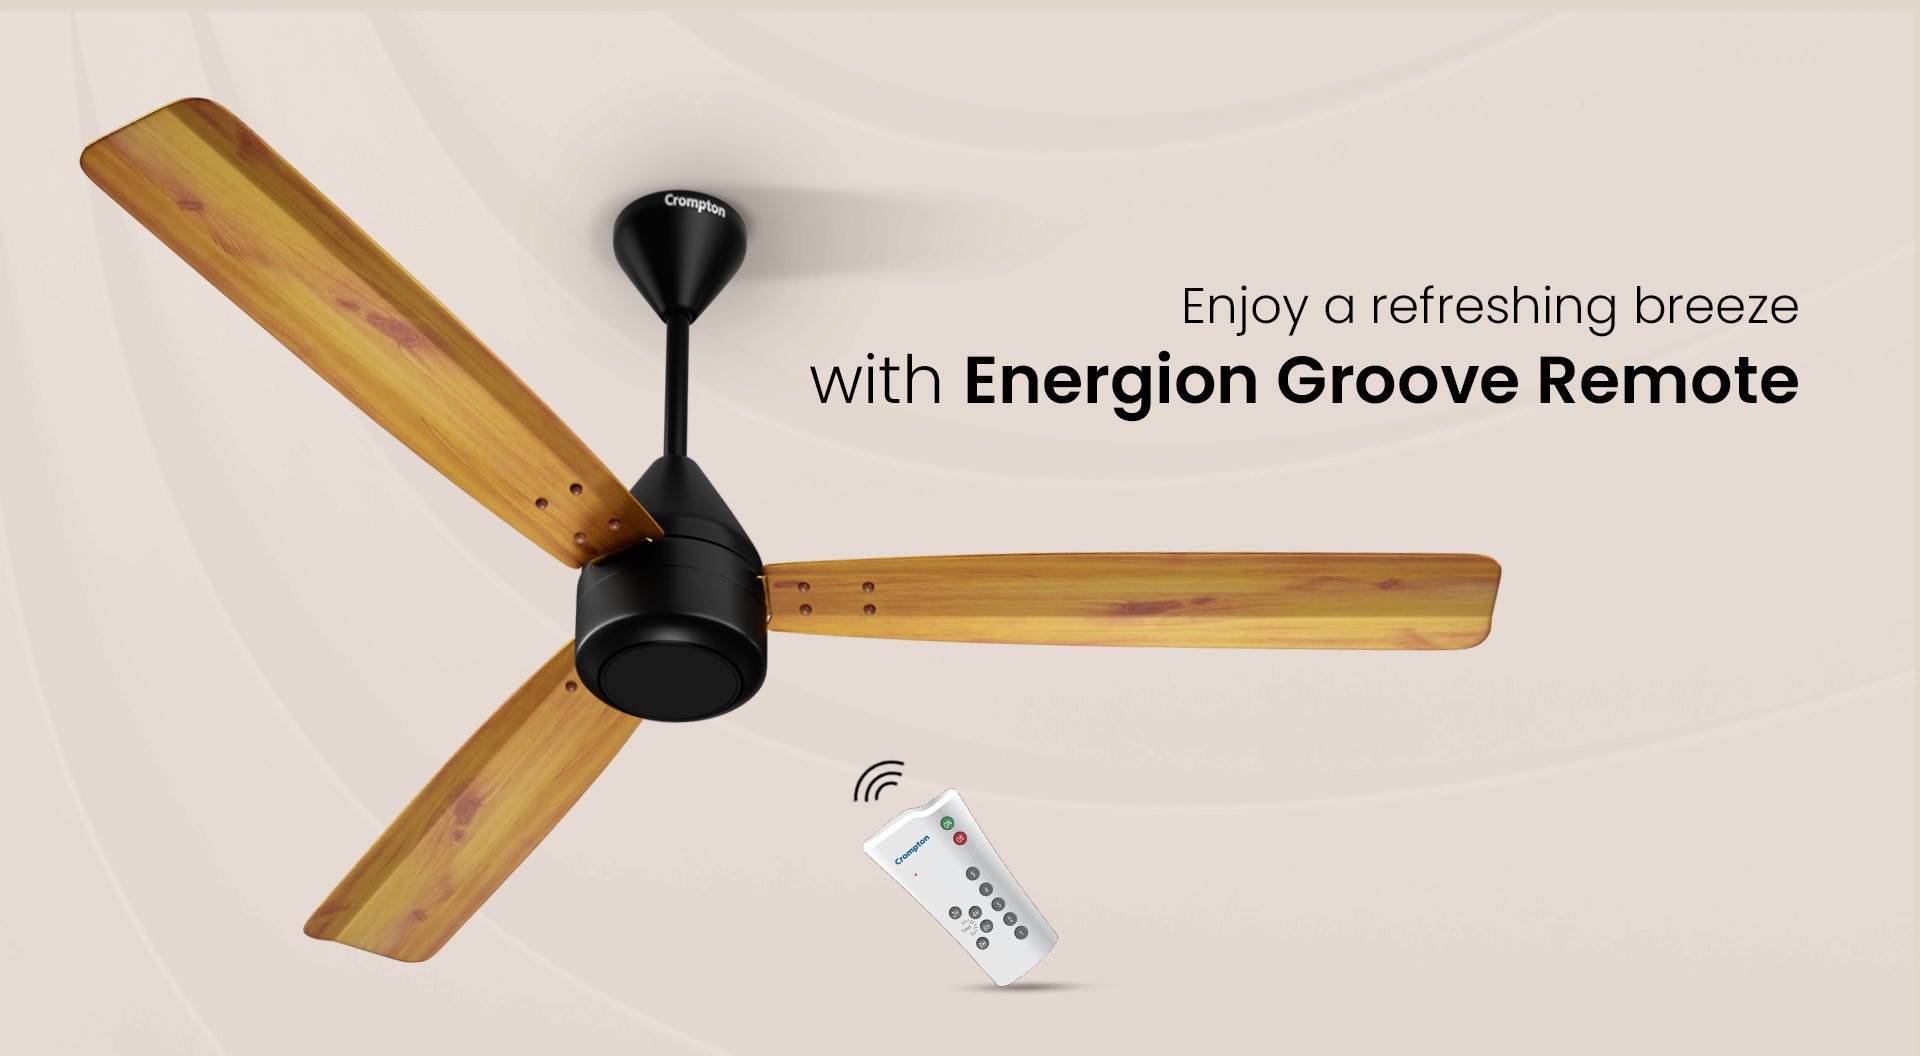 Energion Groove Remote